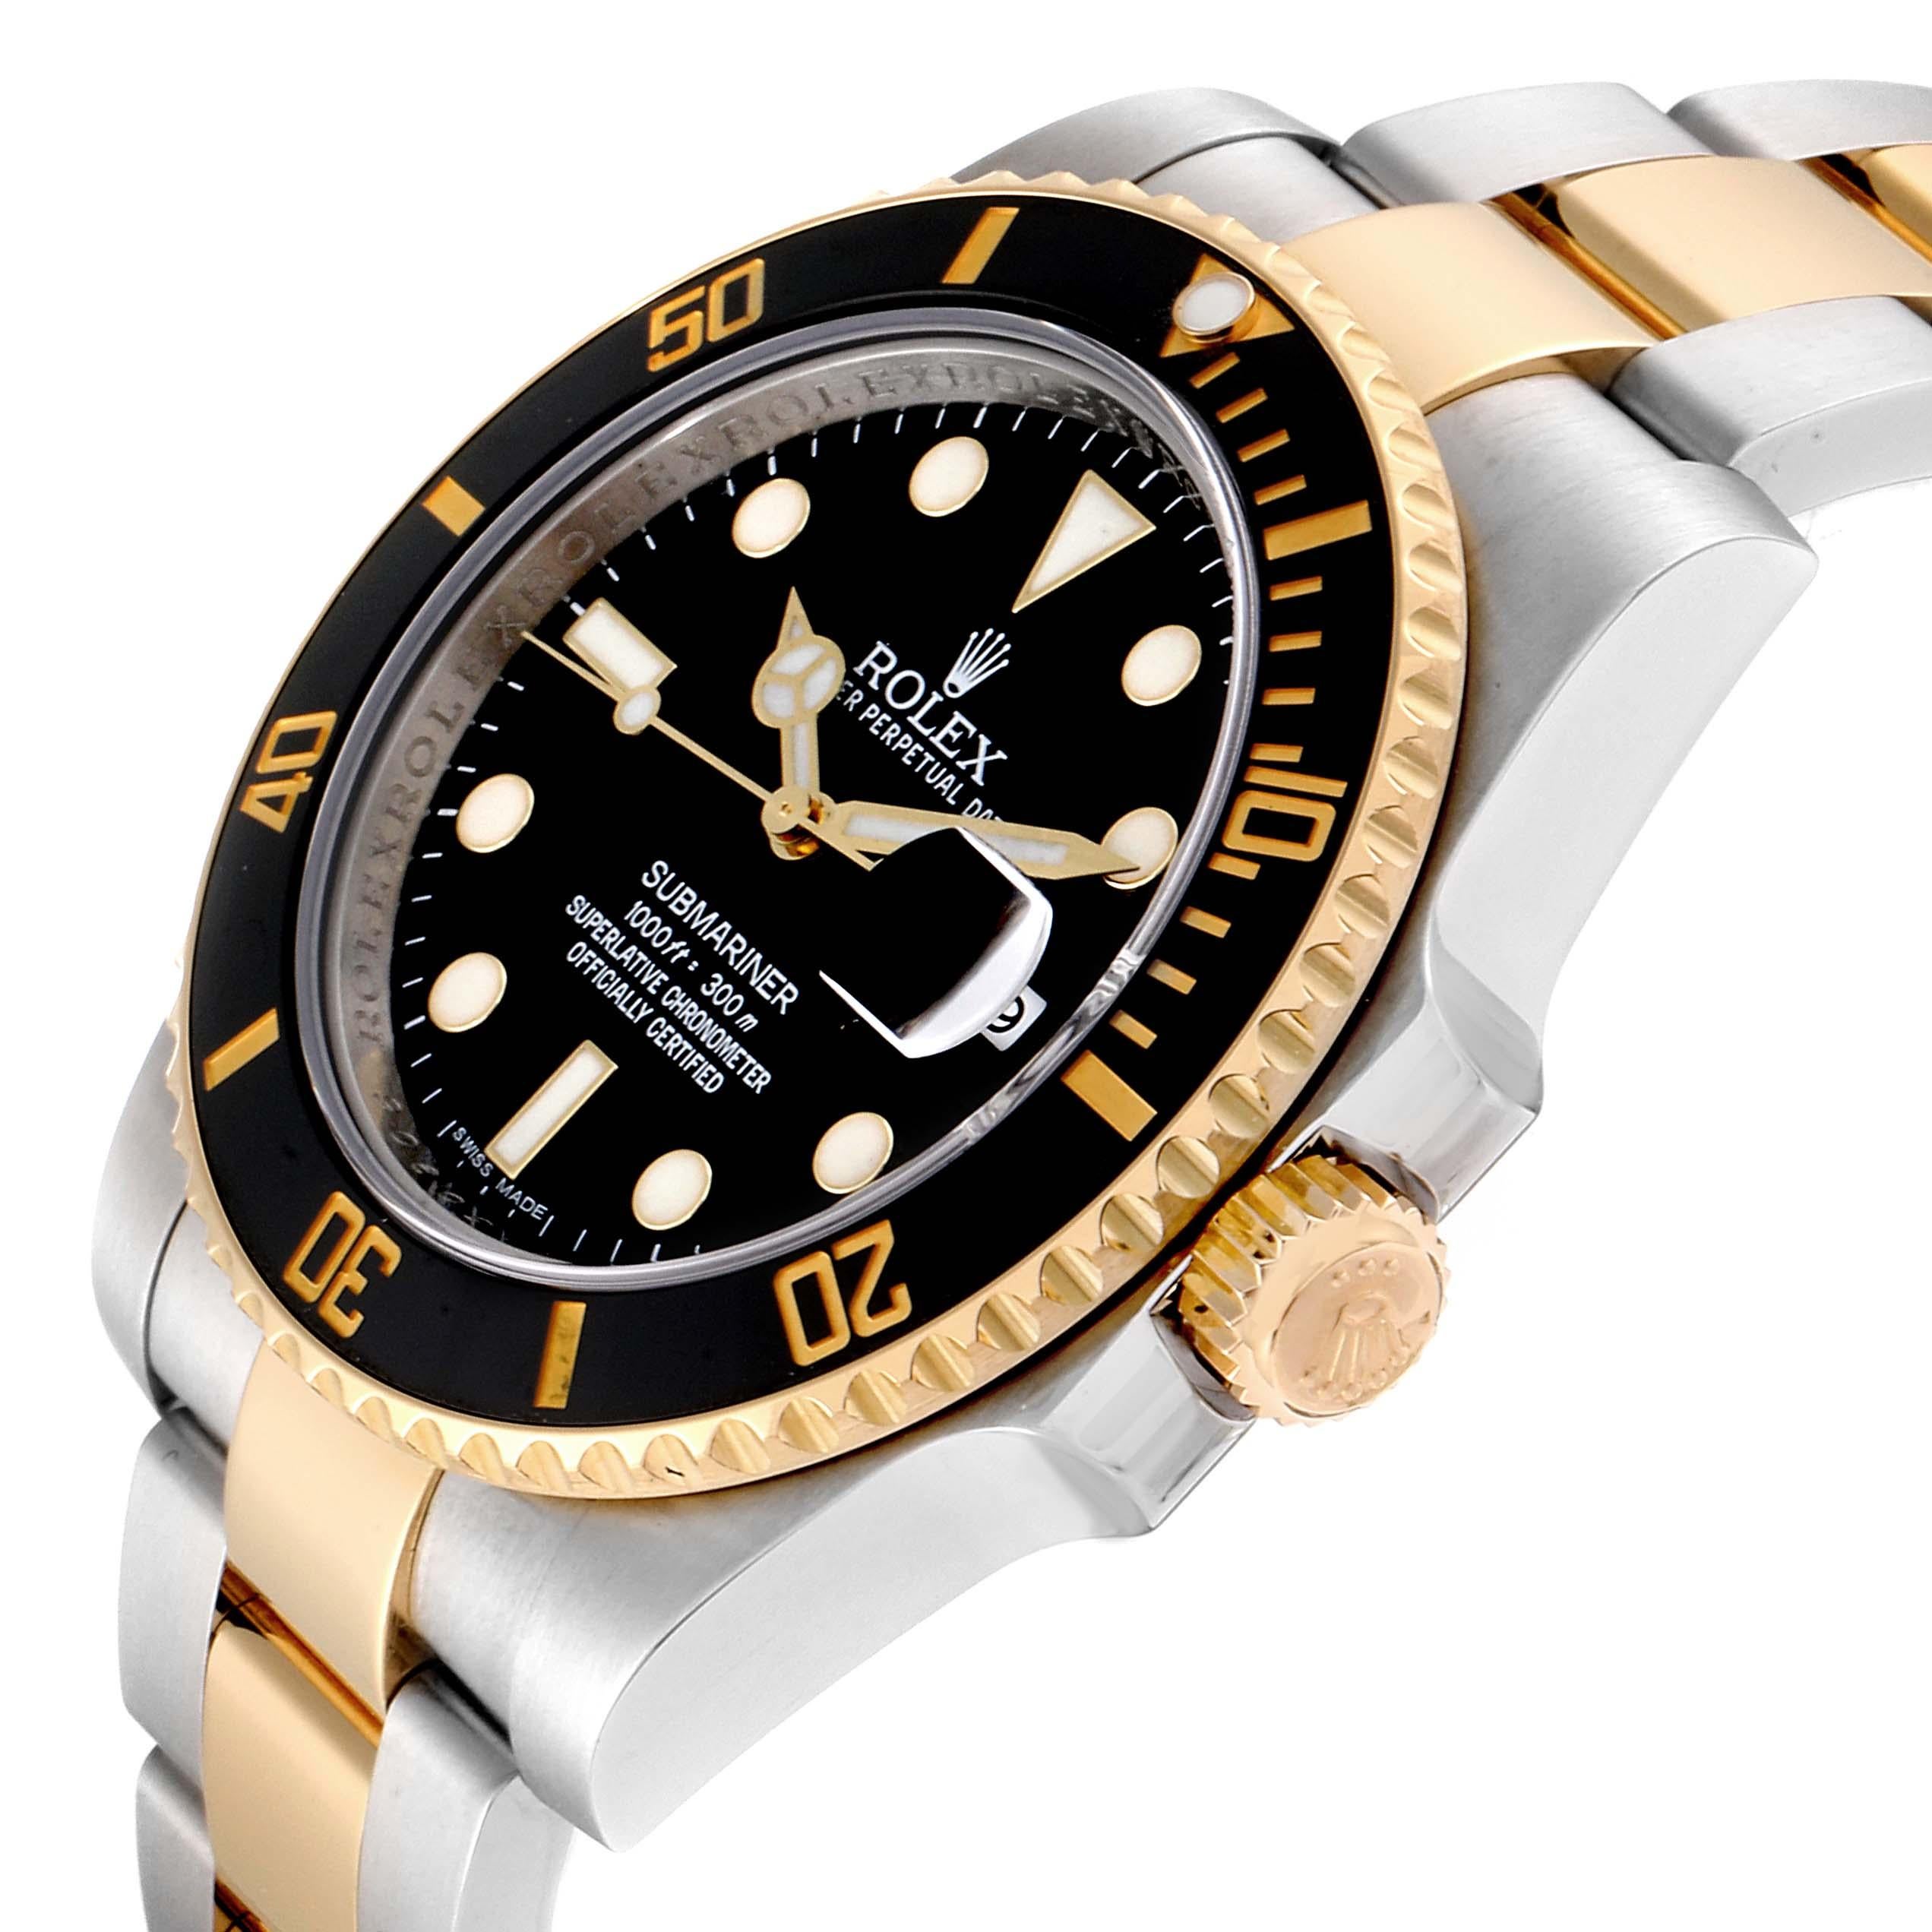 Rolex Submariner Steel Yellow Gold Black Dial Automatic Men's Watch 116613 For Sale 2